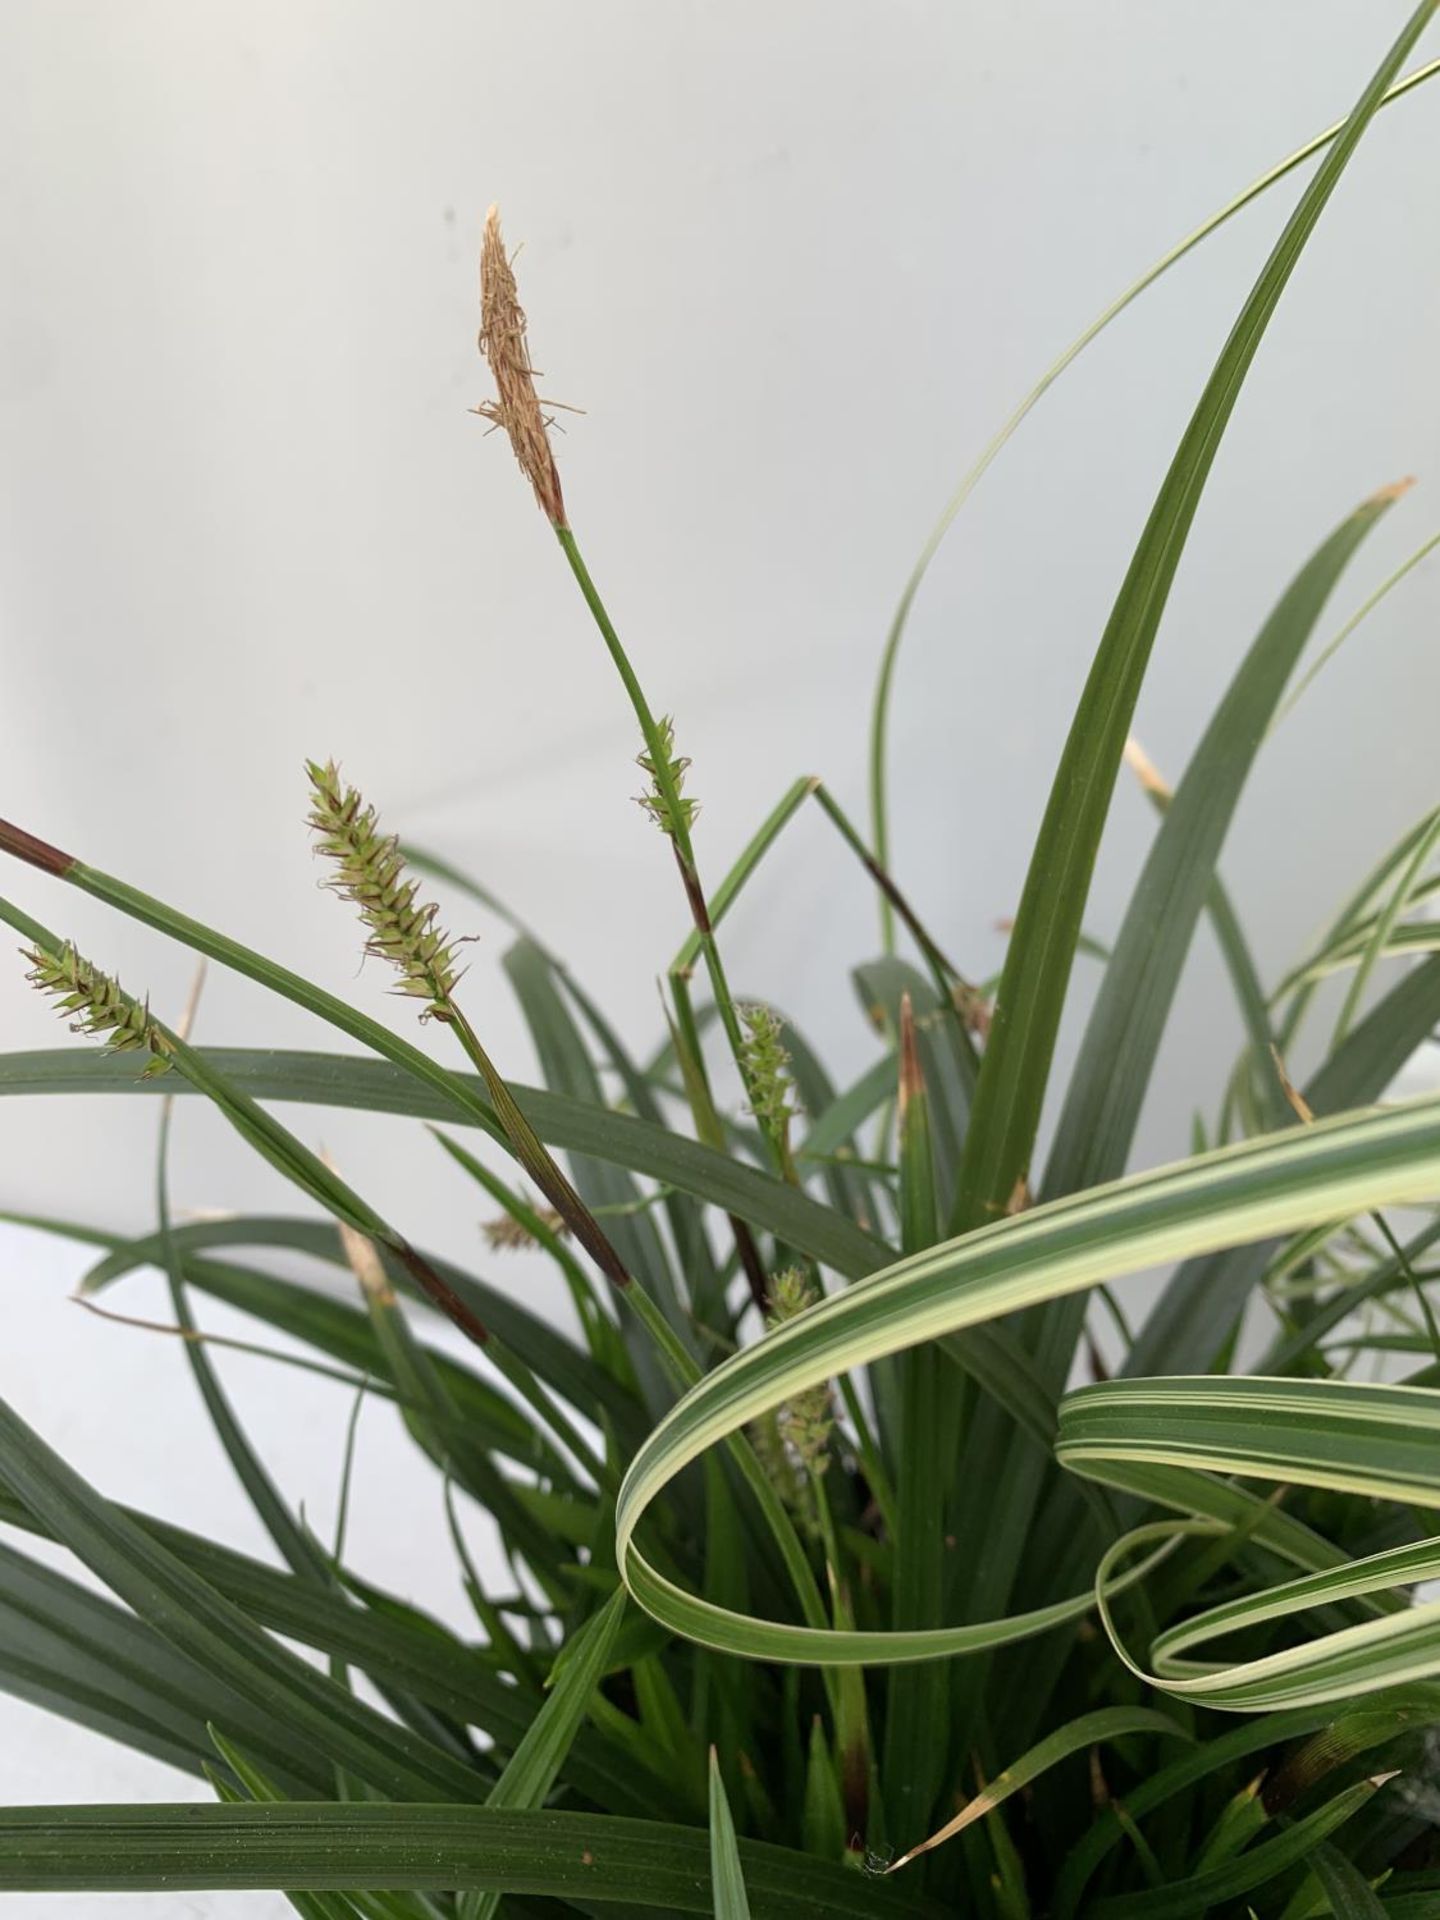 TWO HARDY ORNAMENTAL GRASSES CAREX 'FEATHER FALLS' AND 'IRISH GREEN' IN 3 LTR POTS APPROX 50CM IN - Image 11 of 12